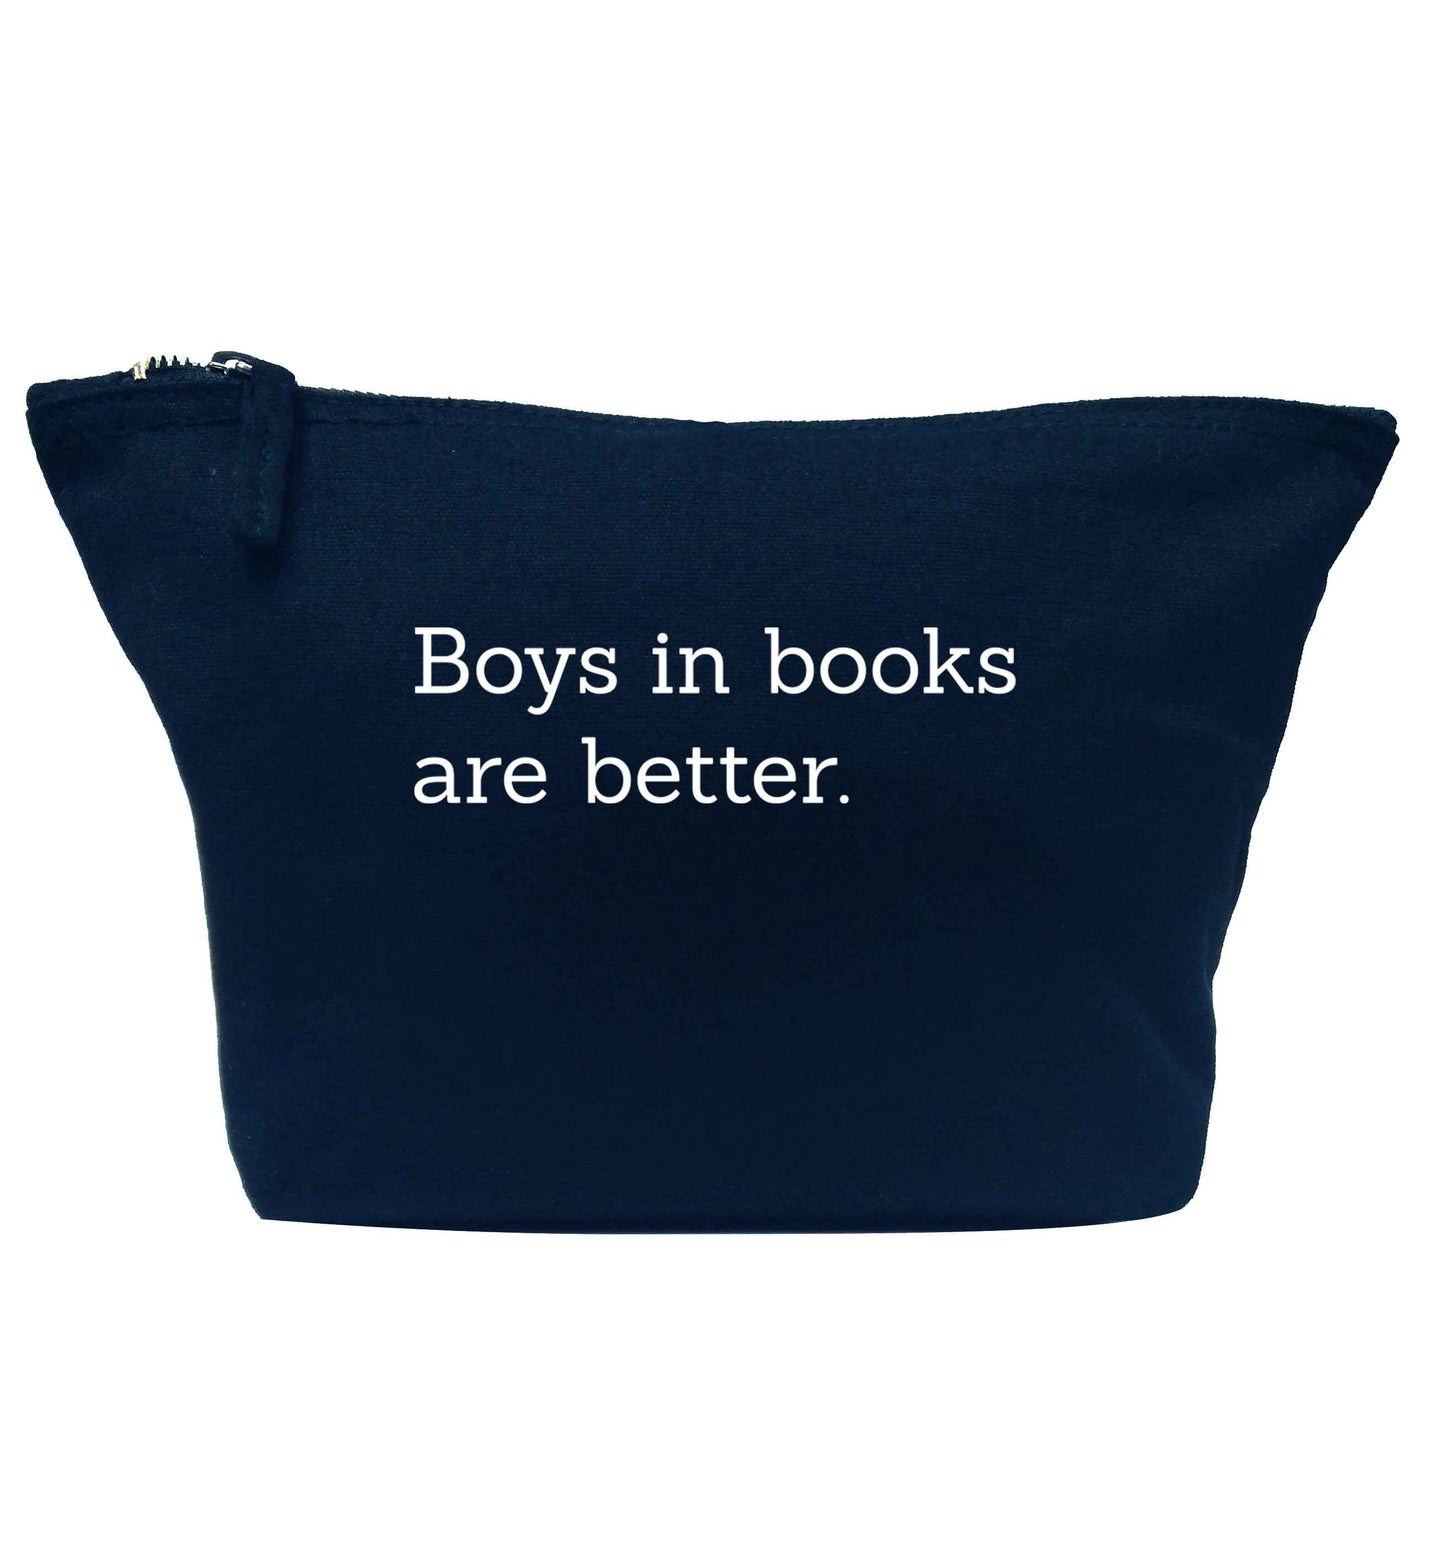 Boys in books are better navy makeup bag